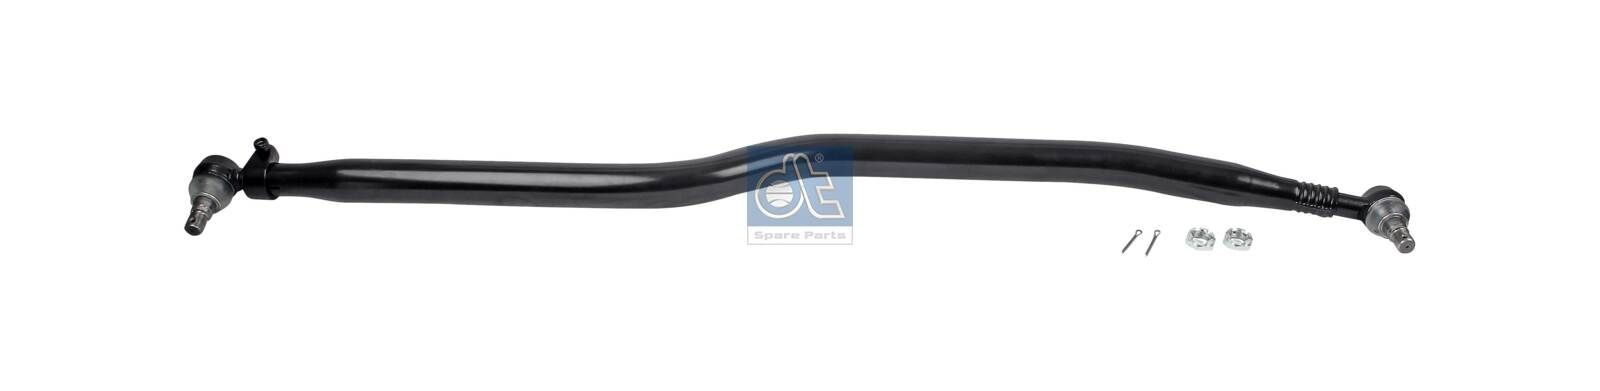 DT Spare Parts 4.69500 Rod Assembly A975 330 00 03